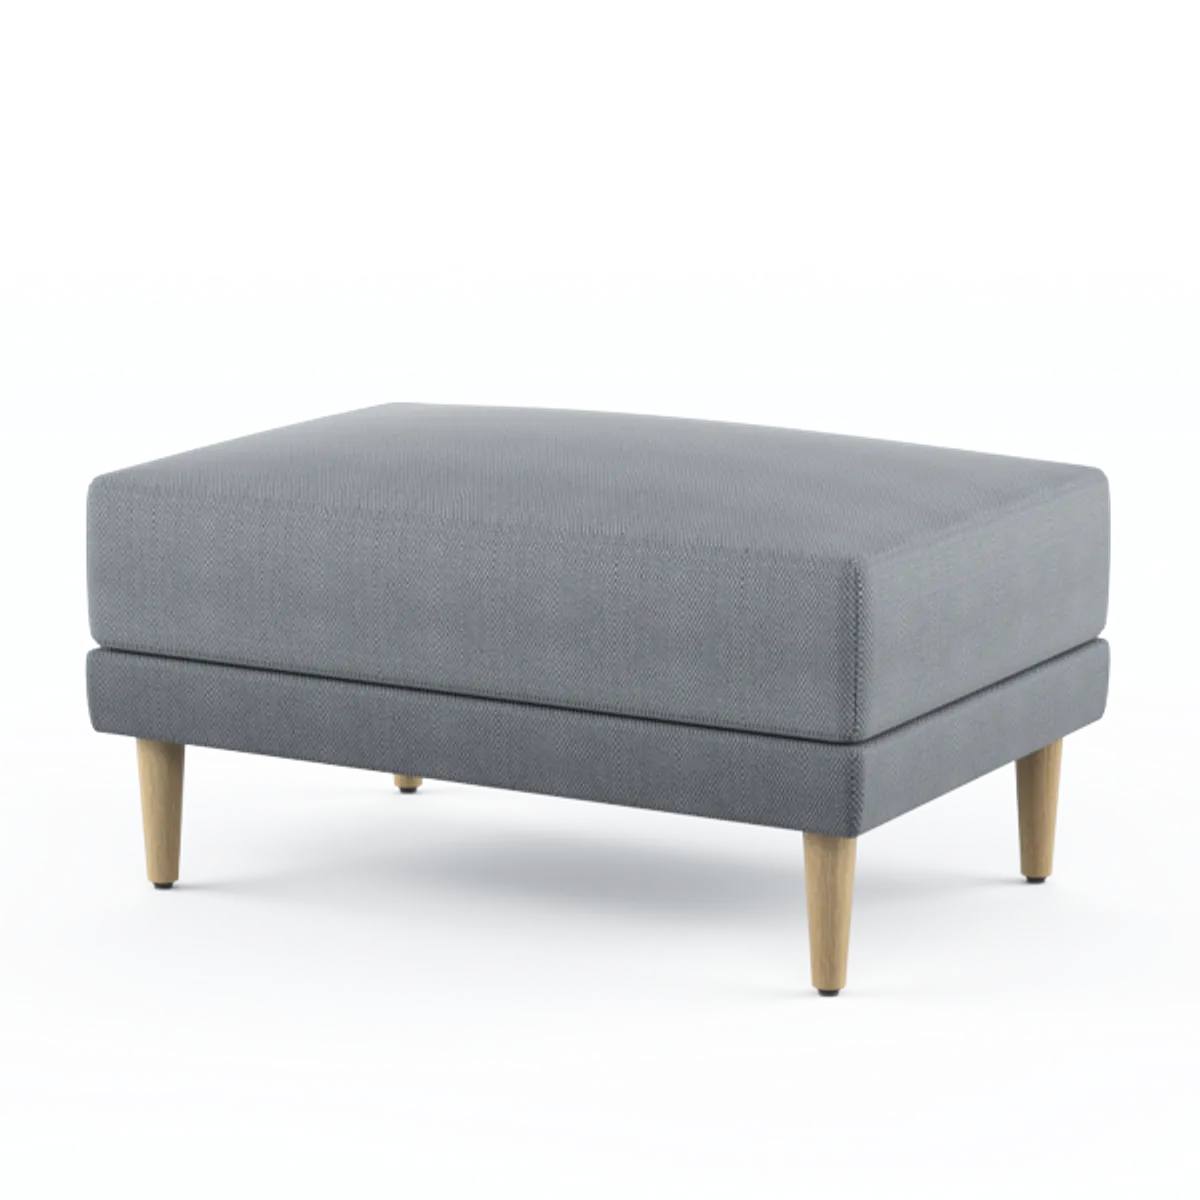 Bespoke Pollen Ottoman Inside Out Contracts 600